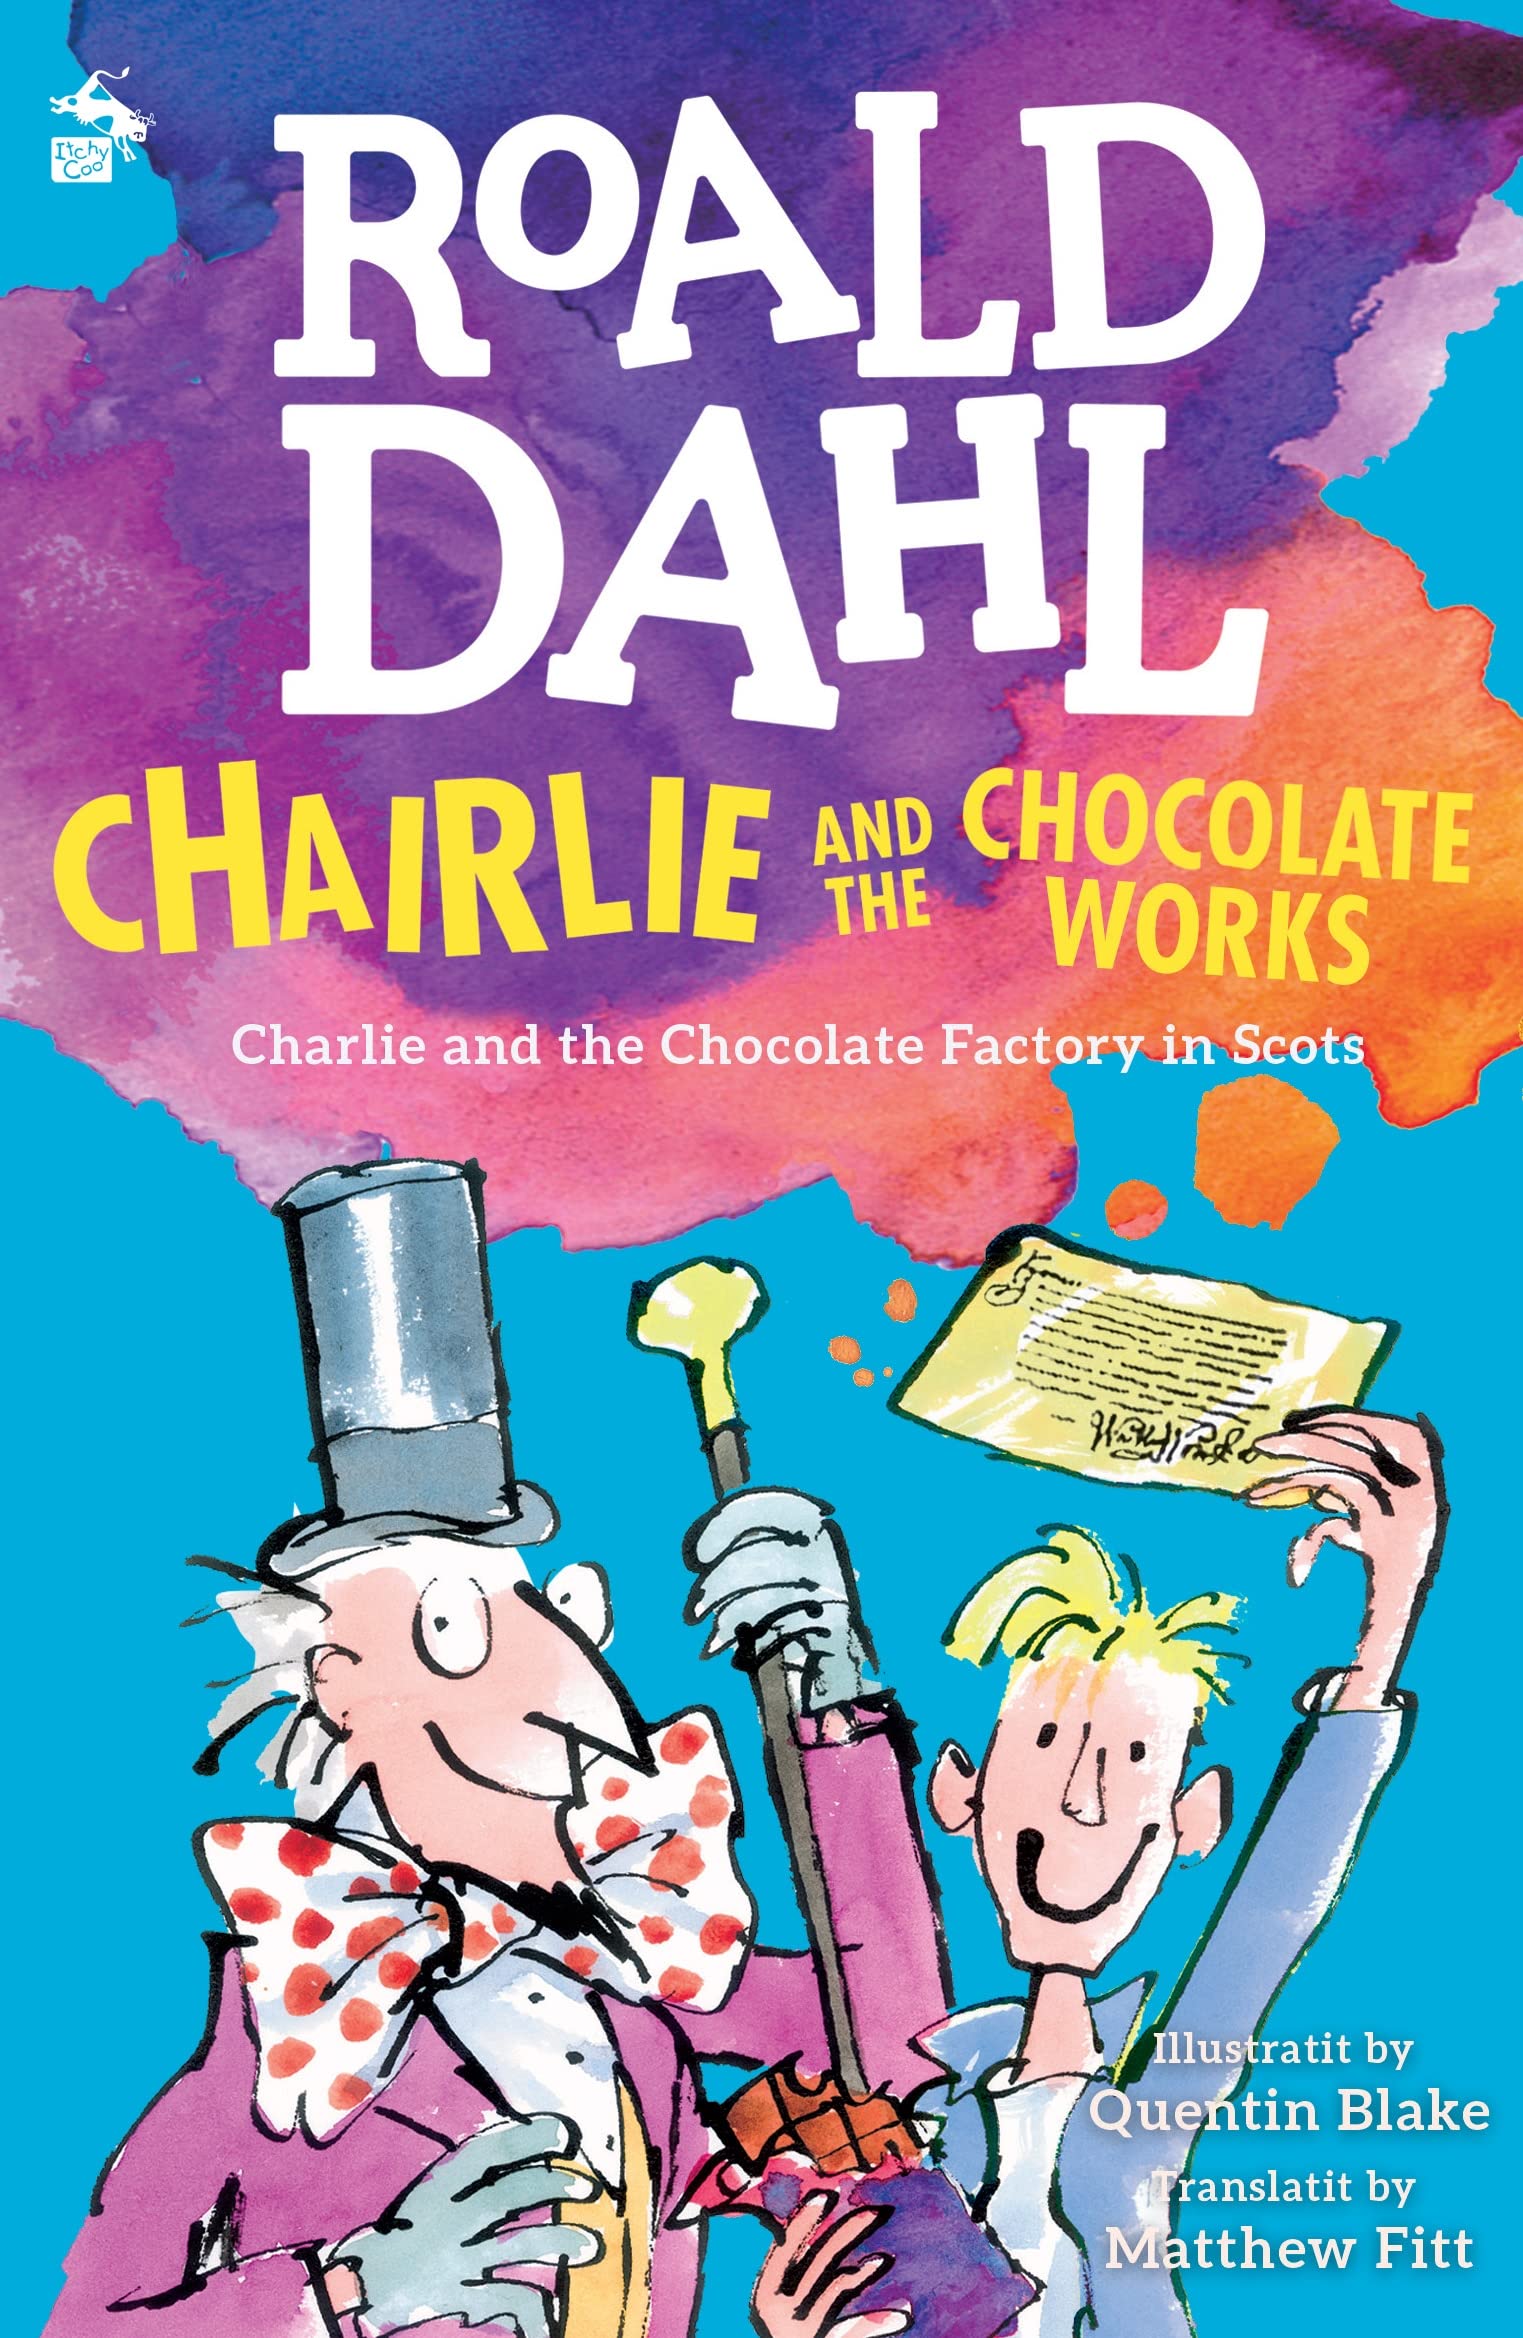 Chairlie and the Chocolate Works: Charlie and the Chocolate Factory in Scots (Scots Edition)